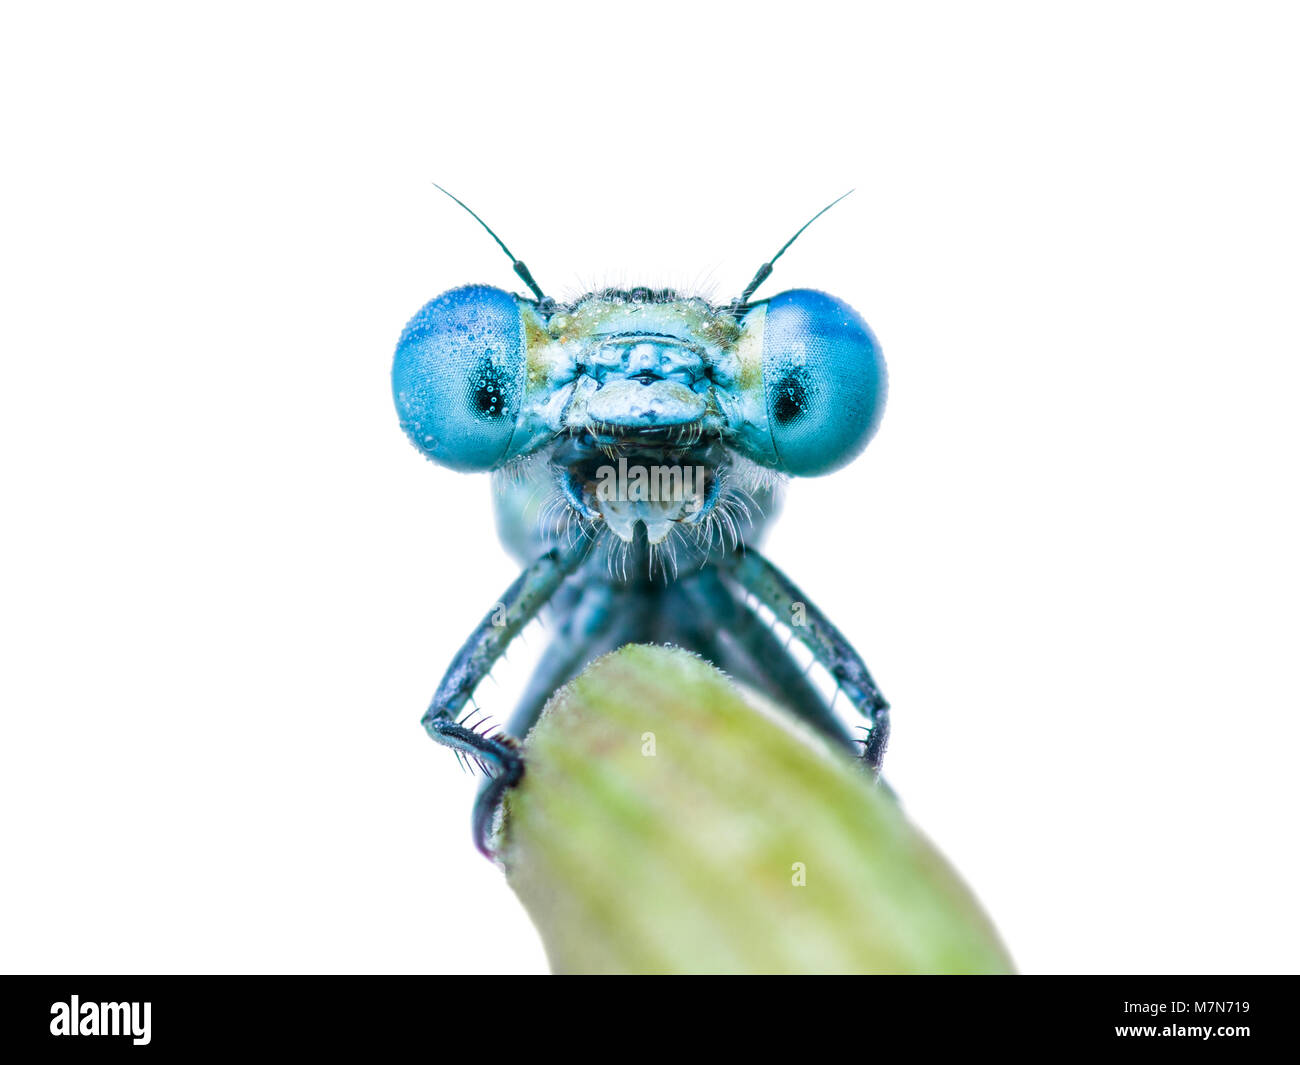 Funny Dragon Fly or Damsel Fly Insect Selfie Portrait on Green Stick Isolated on White Stock Photo